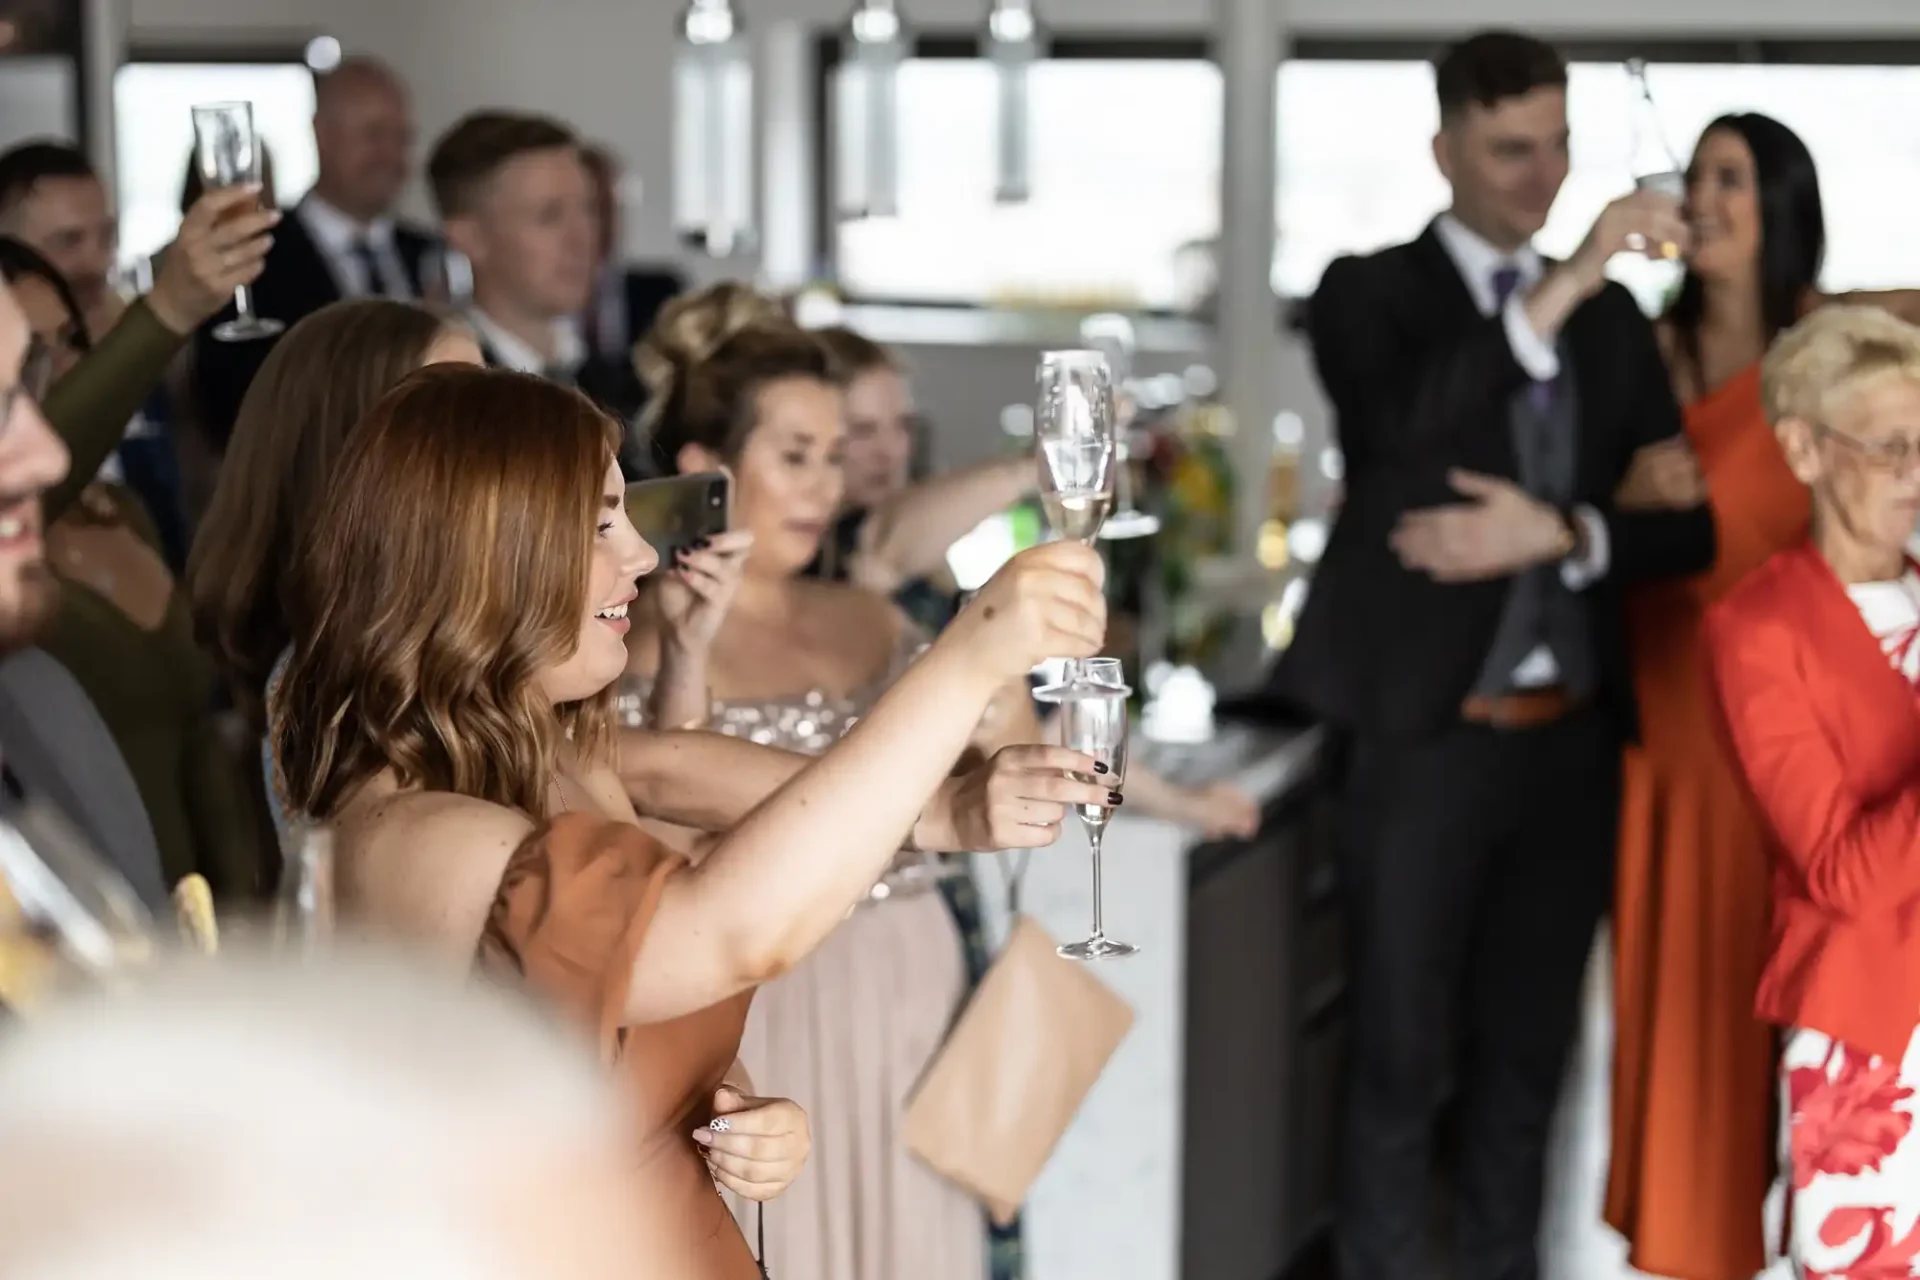 Guests holding up champagne flutes in a toast at a formal indoor gathering, focused on a woman with a raised glass in the foreground.